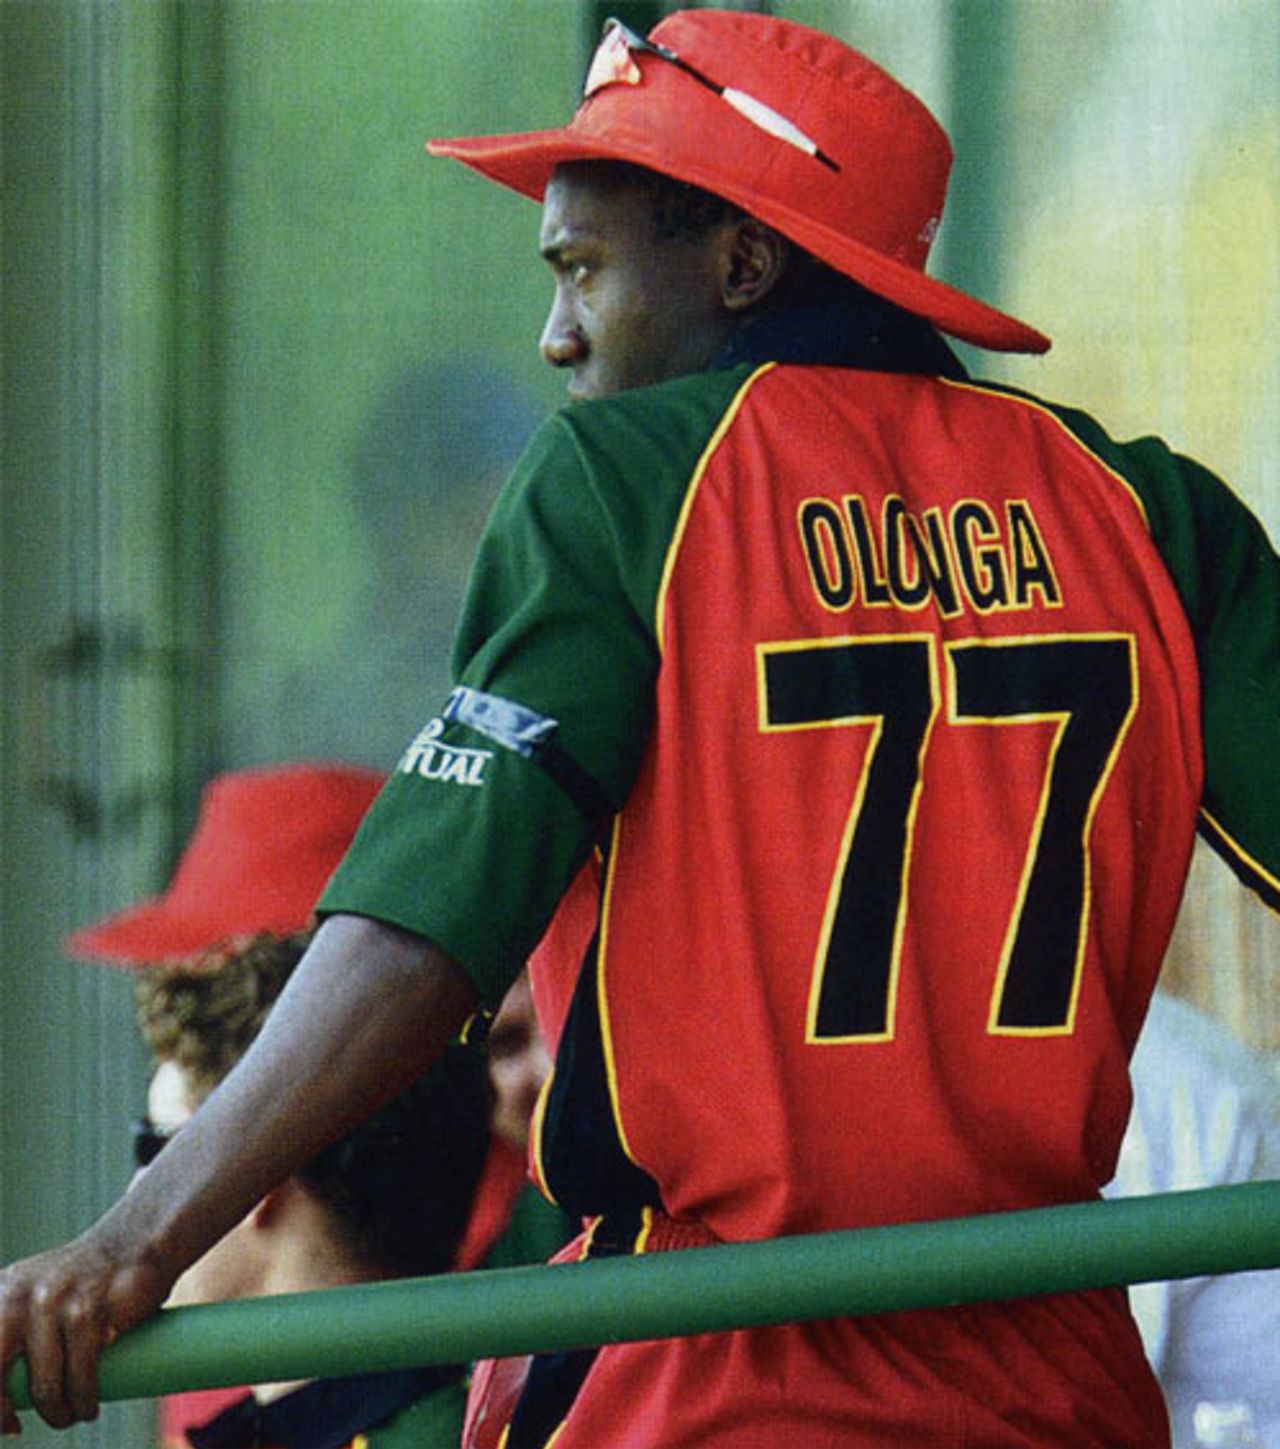 Henry Olonga wears a black armband in protest while in the players' enclosure,  Zimbabwe v Namibia, Harare, 10 February 2003